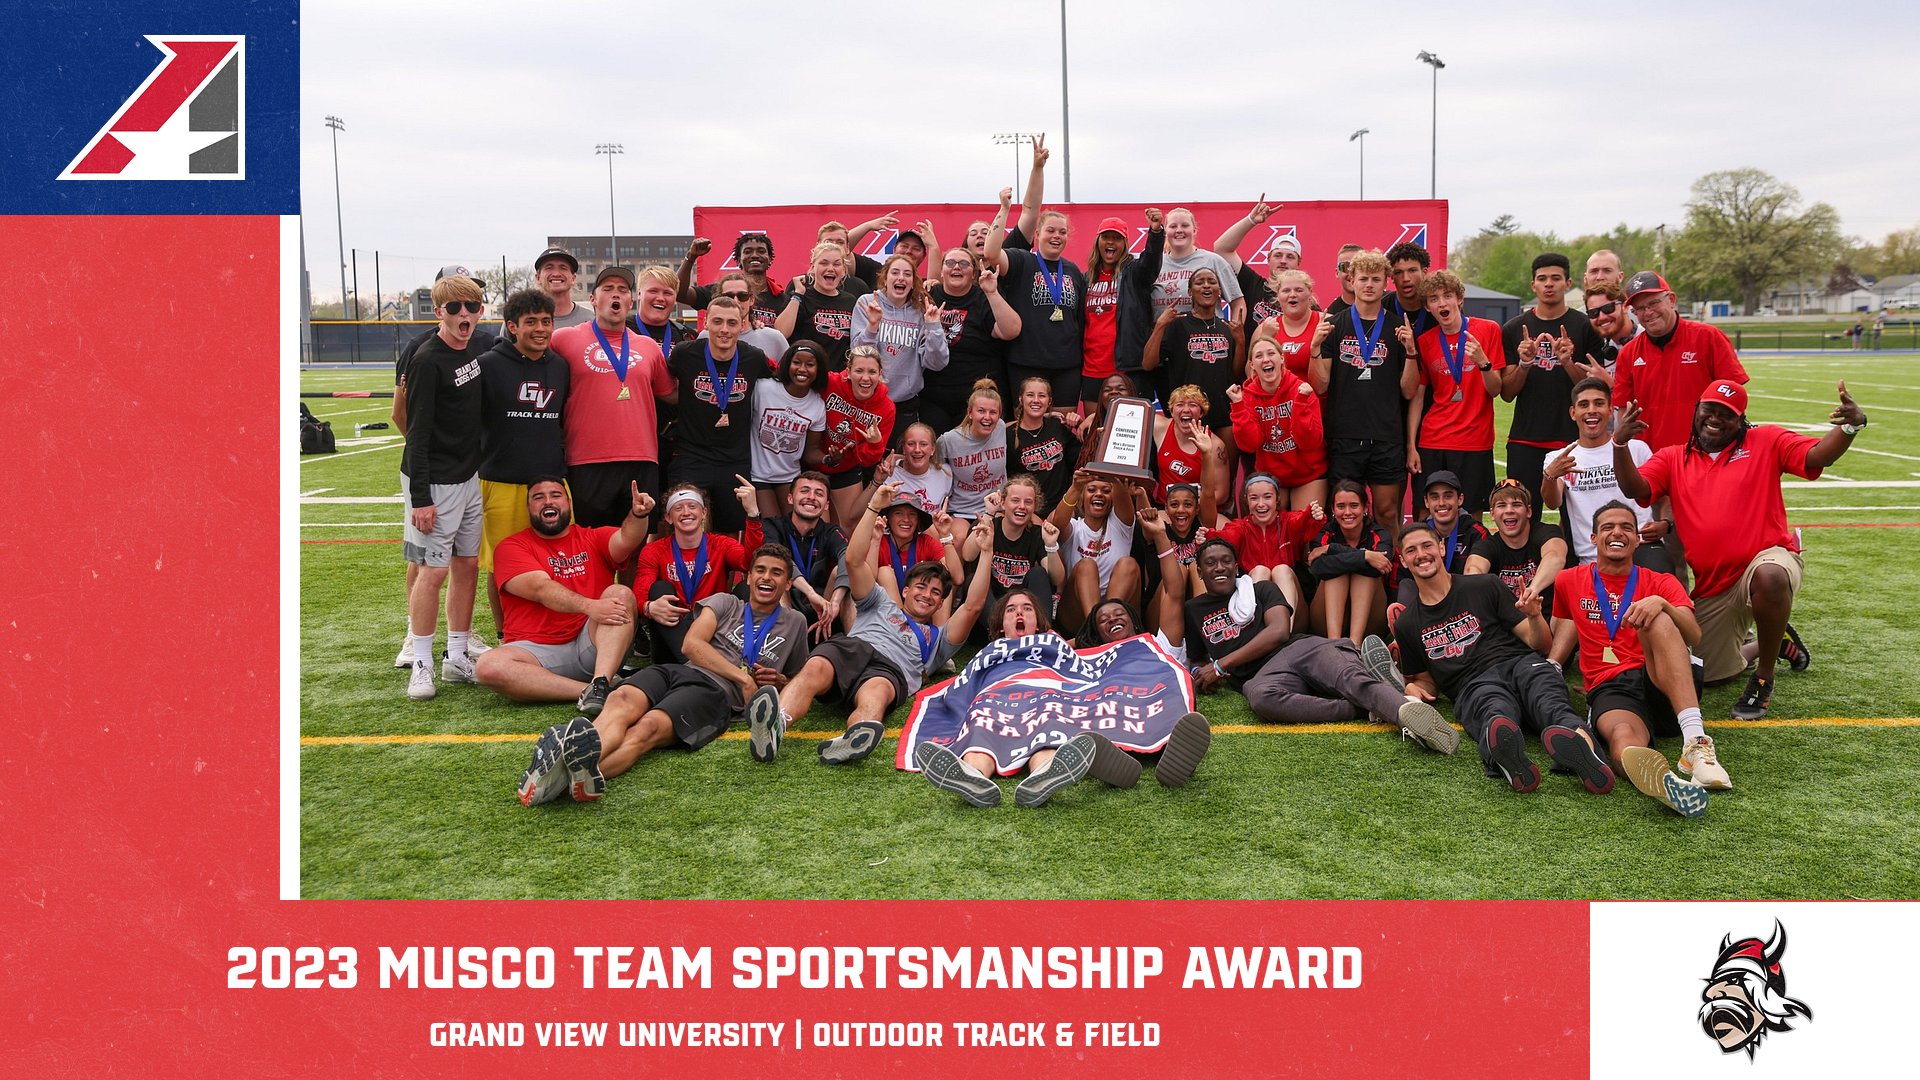 Grand View University Selected 2023 Musco Team Sportsmanship Award for Outdoor Track & Field